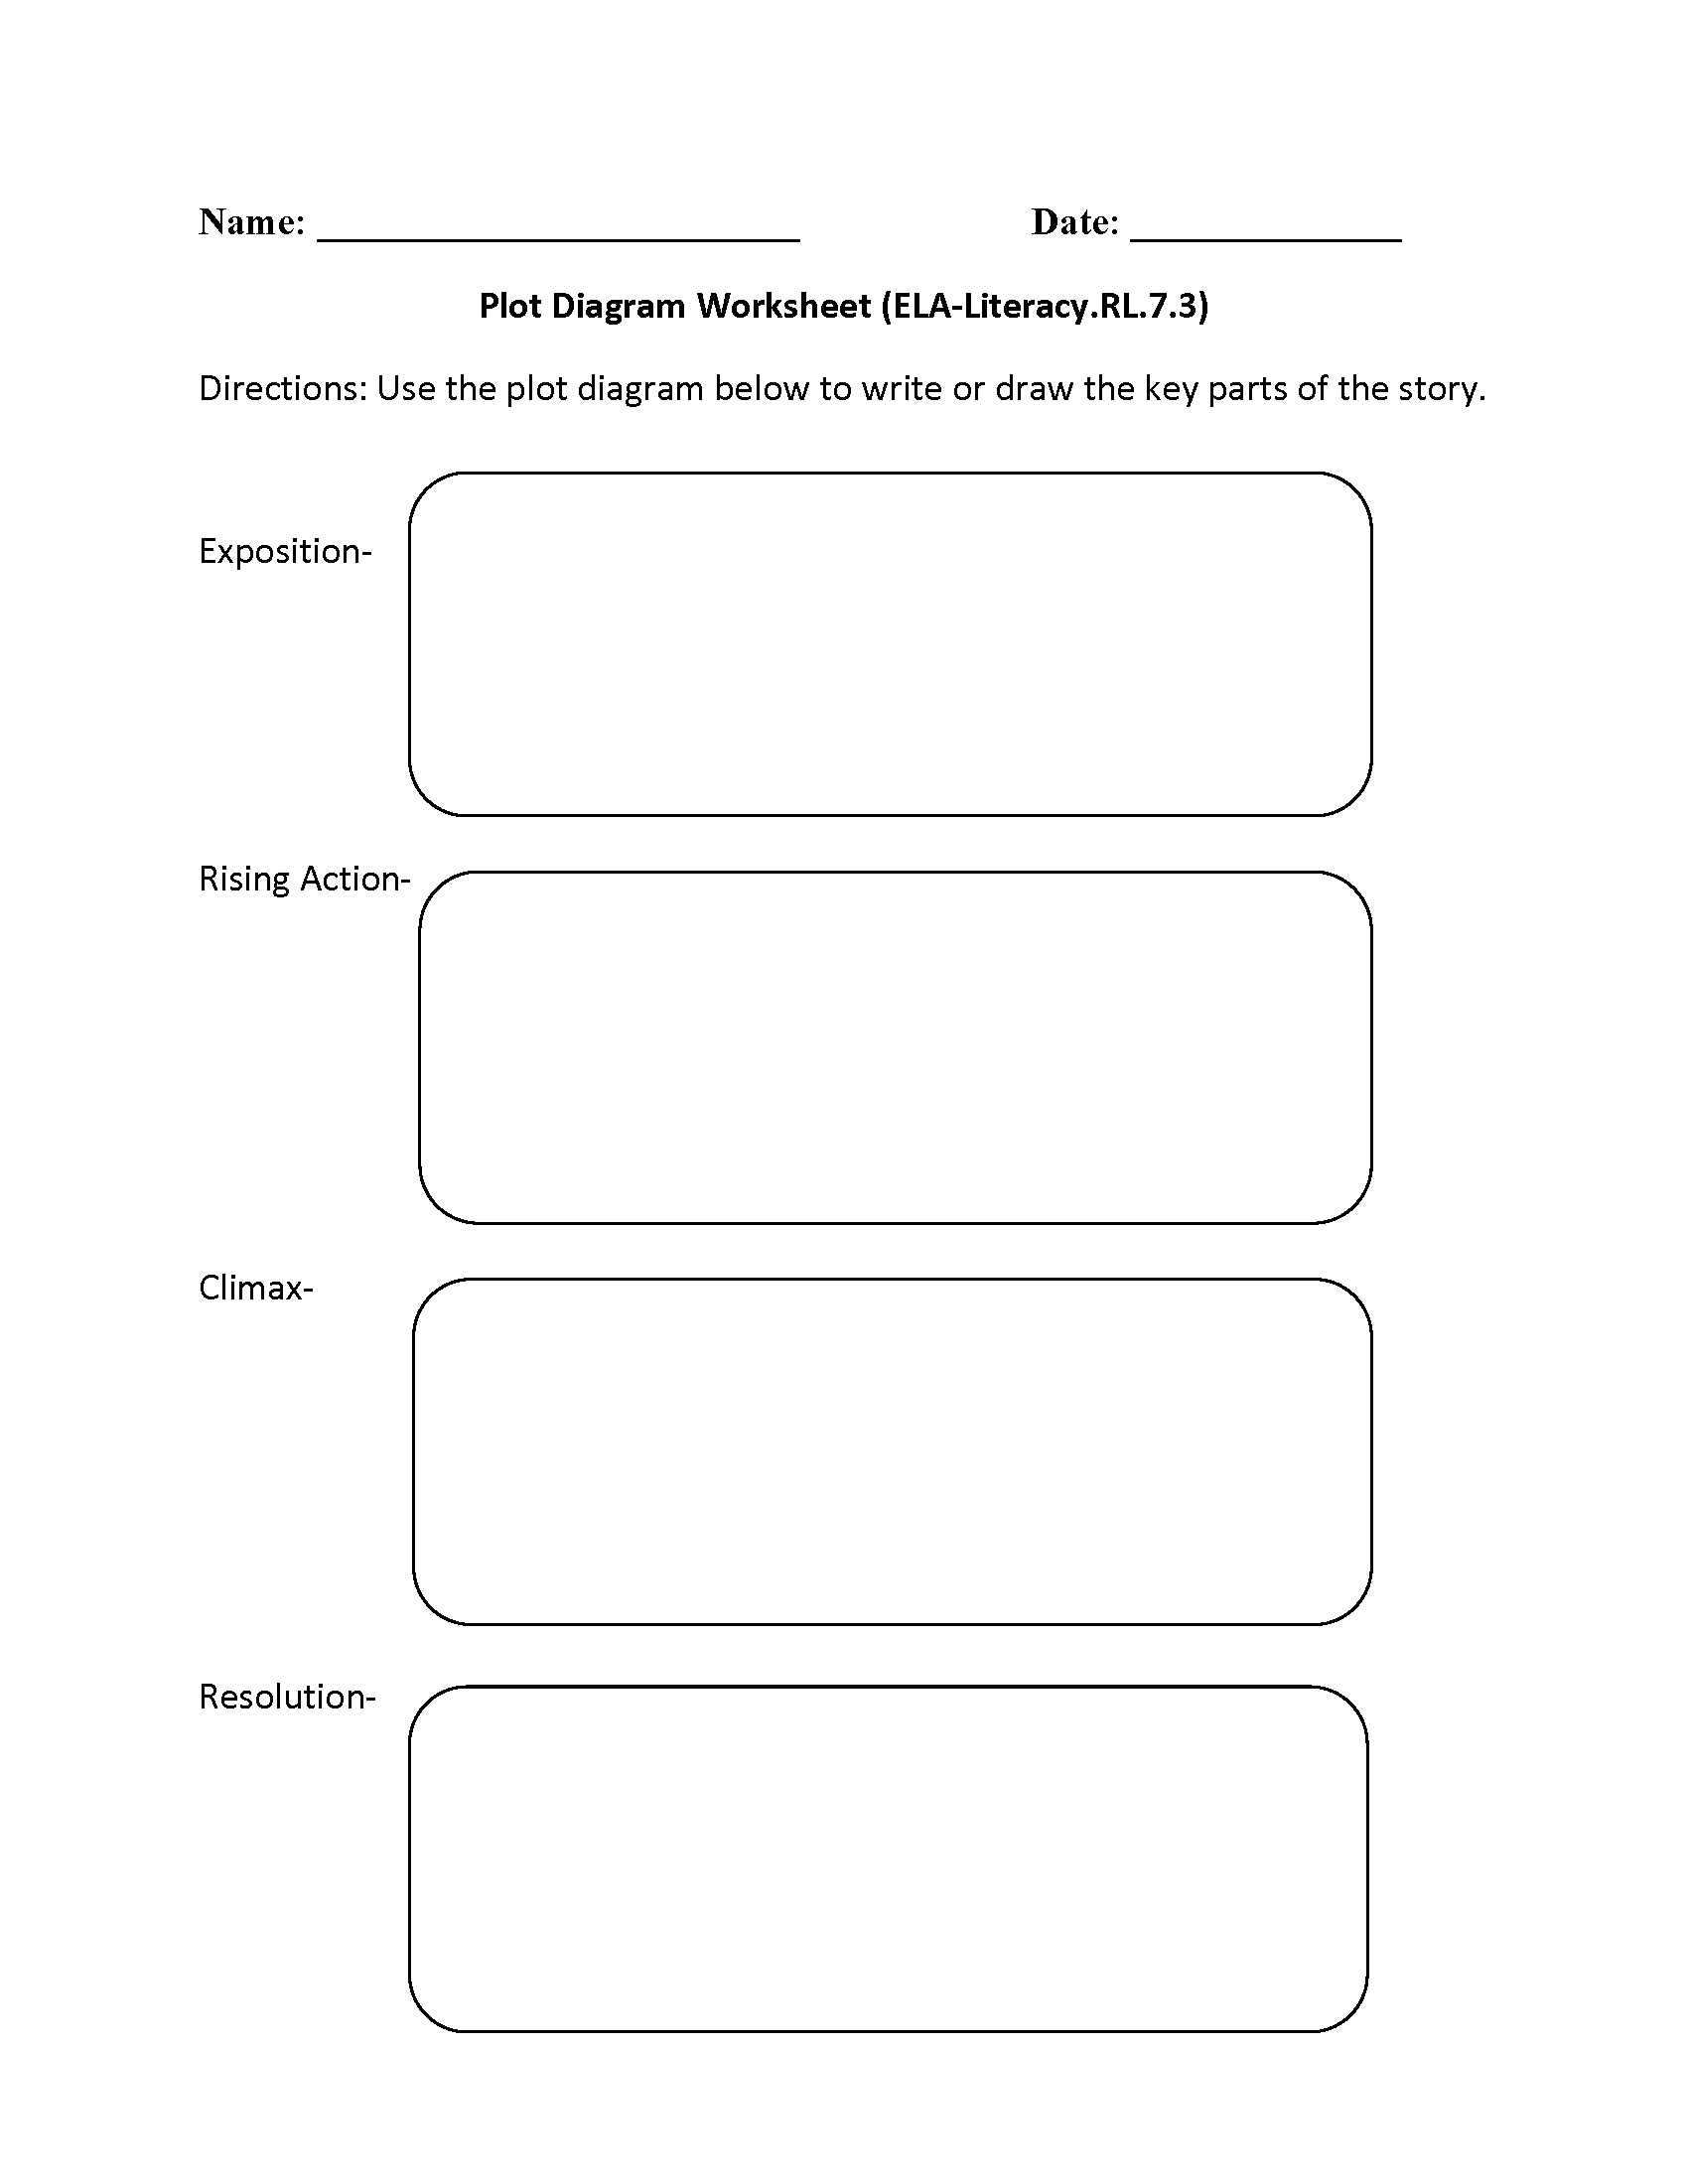 English to Metric Conversion Worksheet Also Character Setting Plot Worksheet Worksheets for All